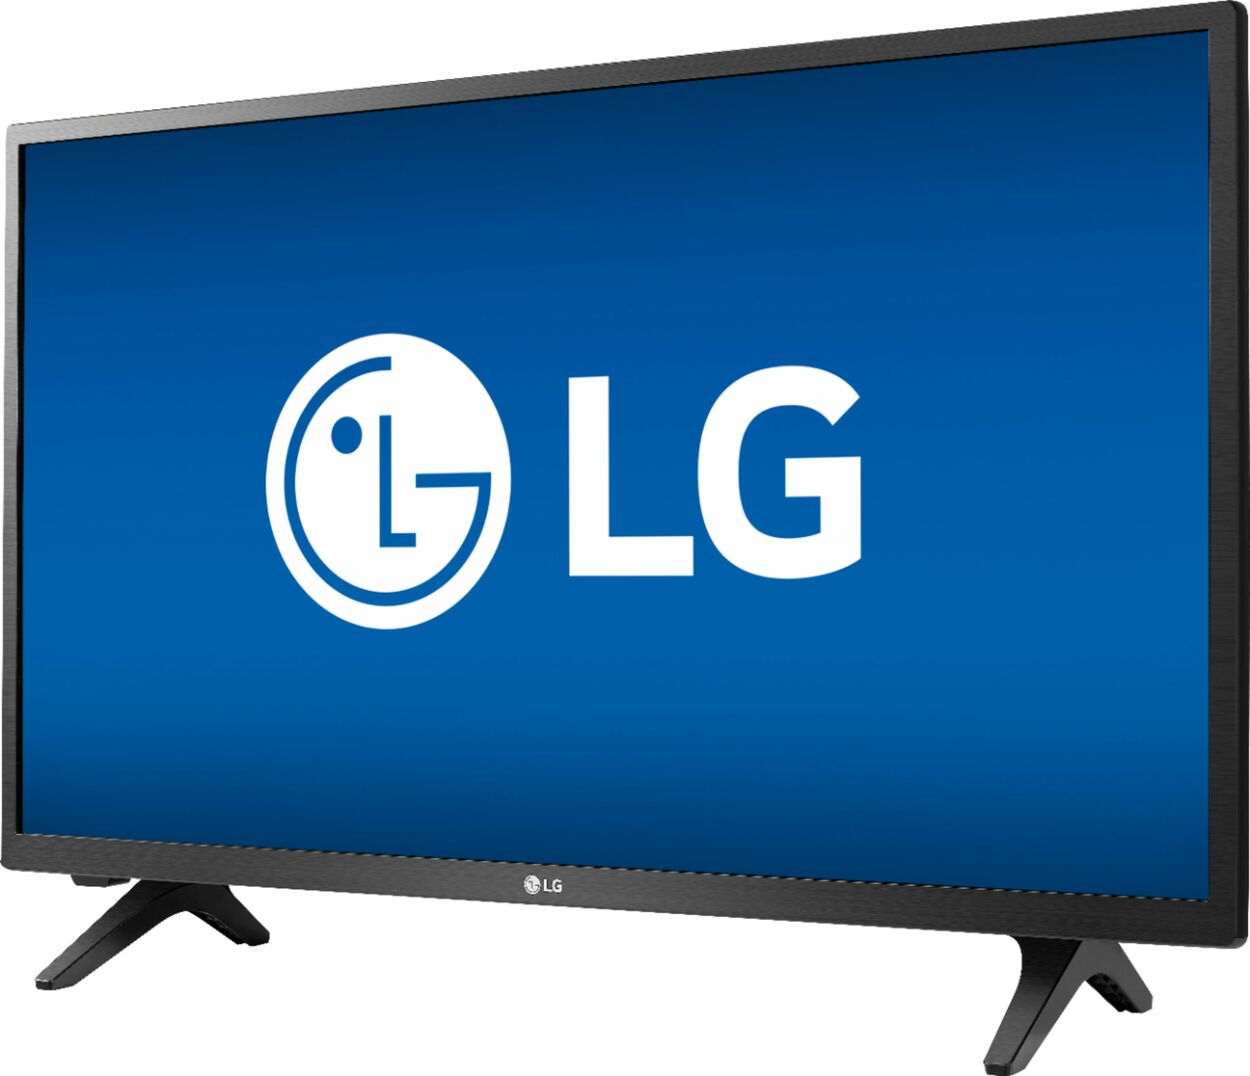 How To Add DirecTV To LG Smart TV